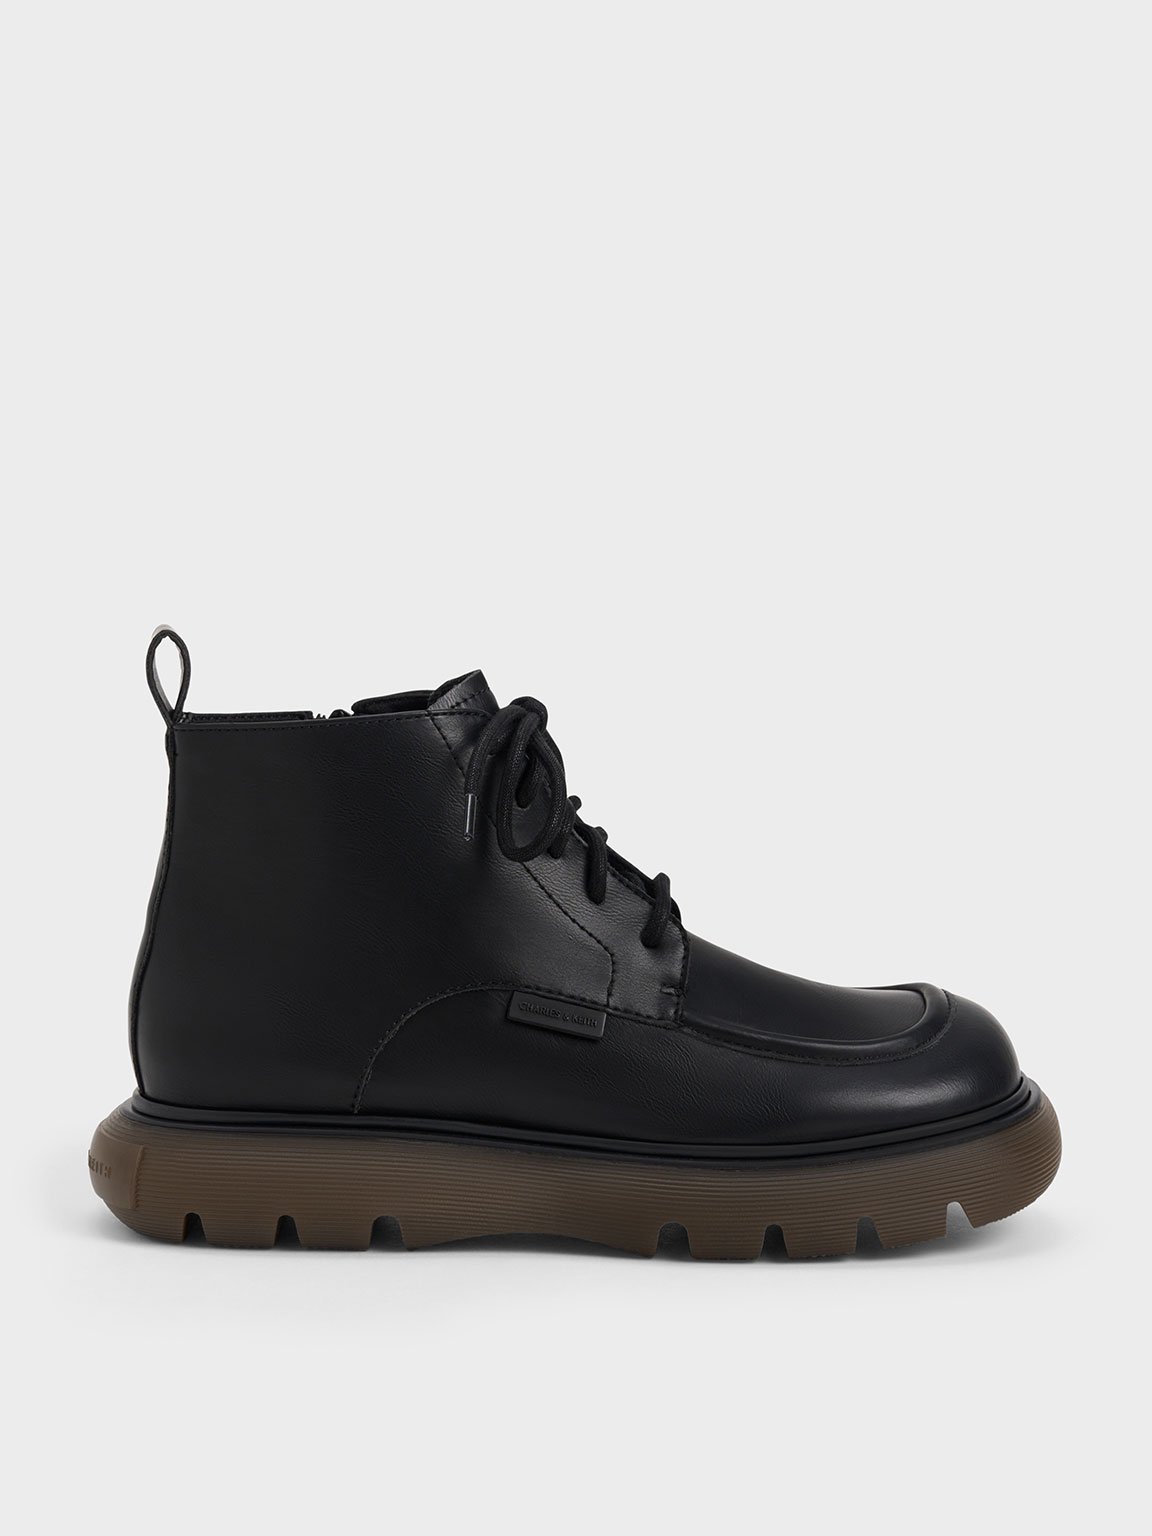 Black Gum Sole Lace-Up Ankle Boots - CHARLES & KEITH UK